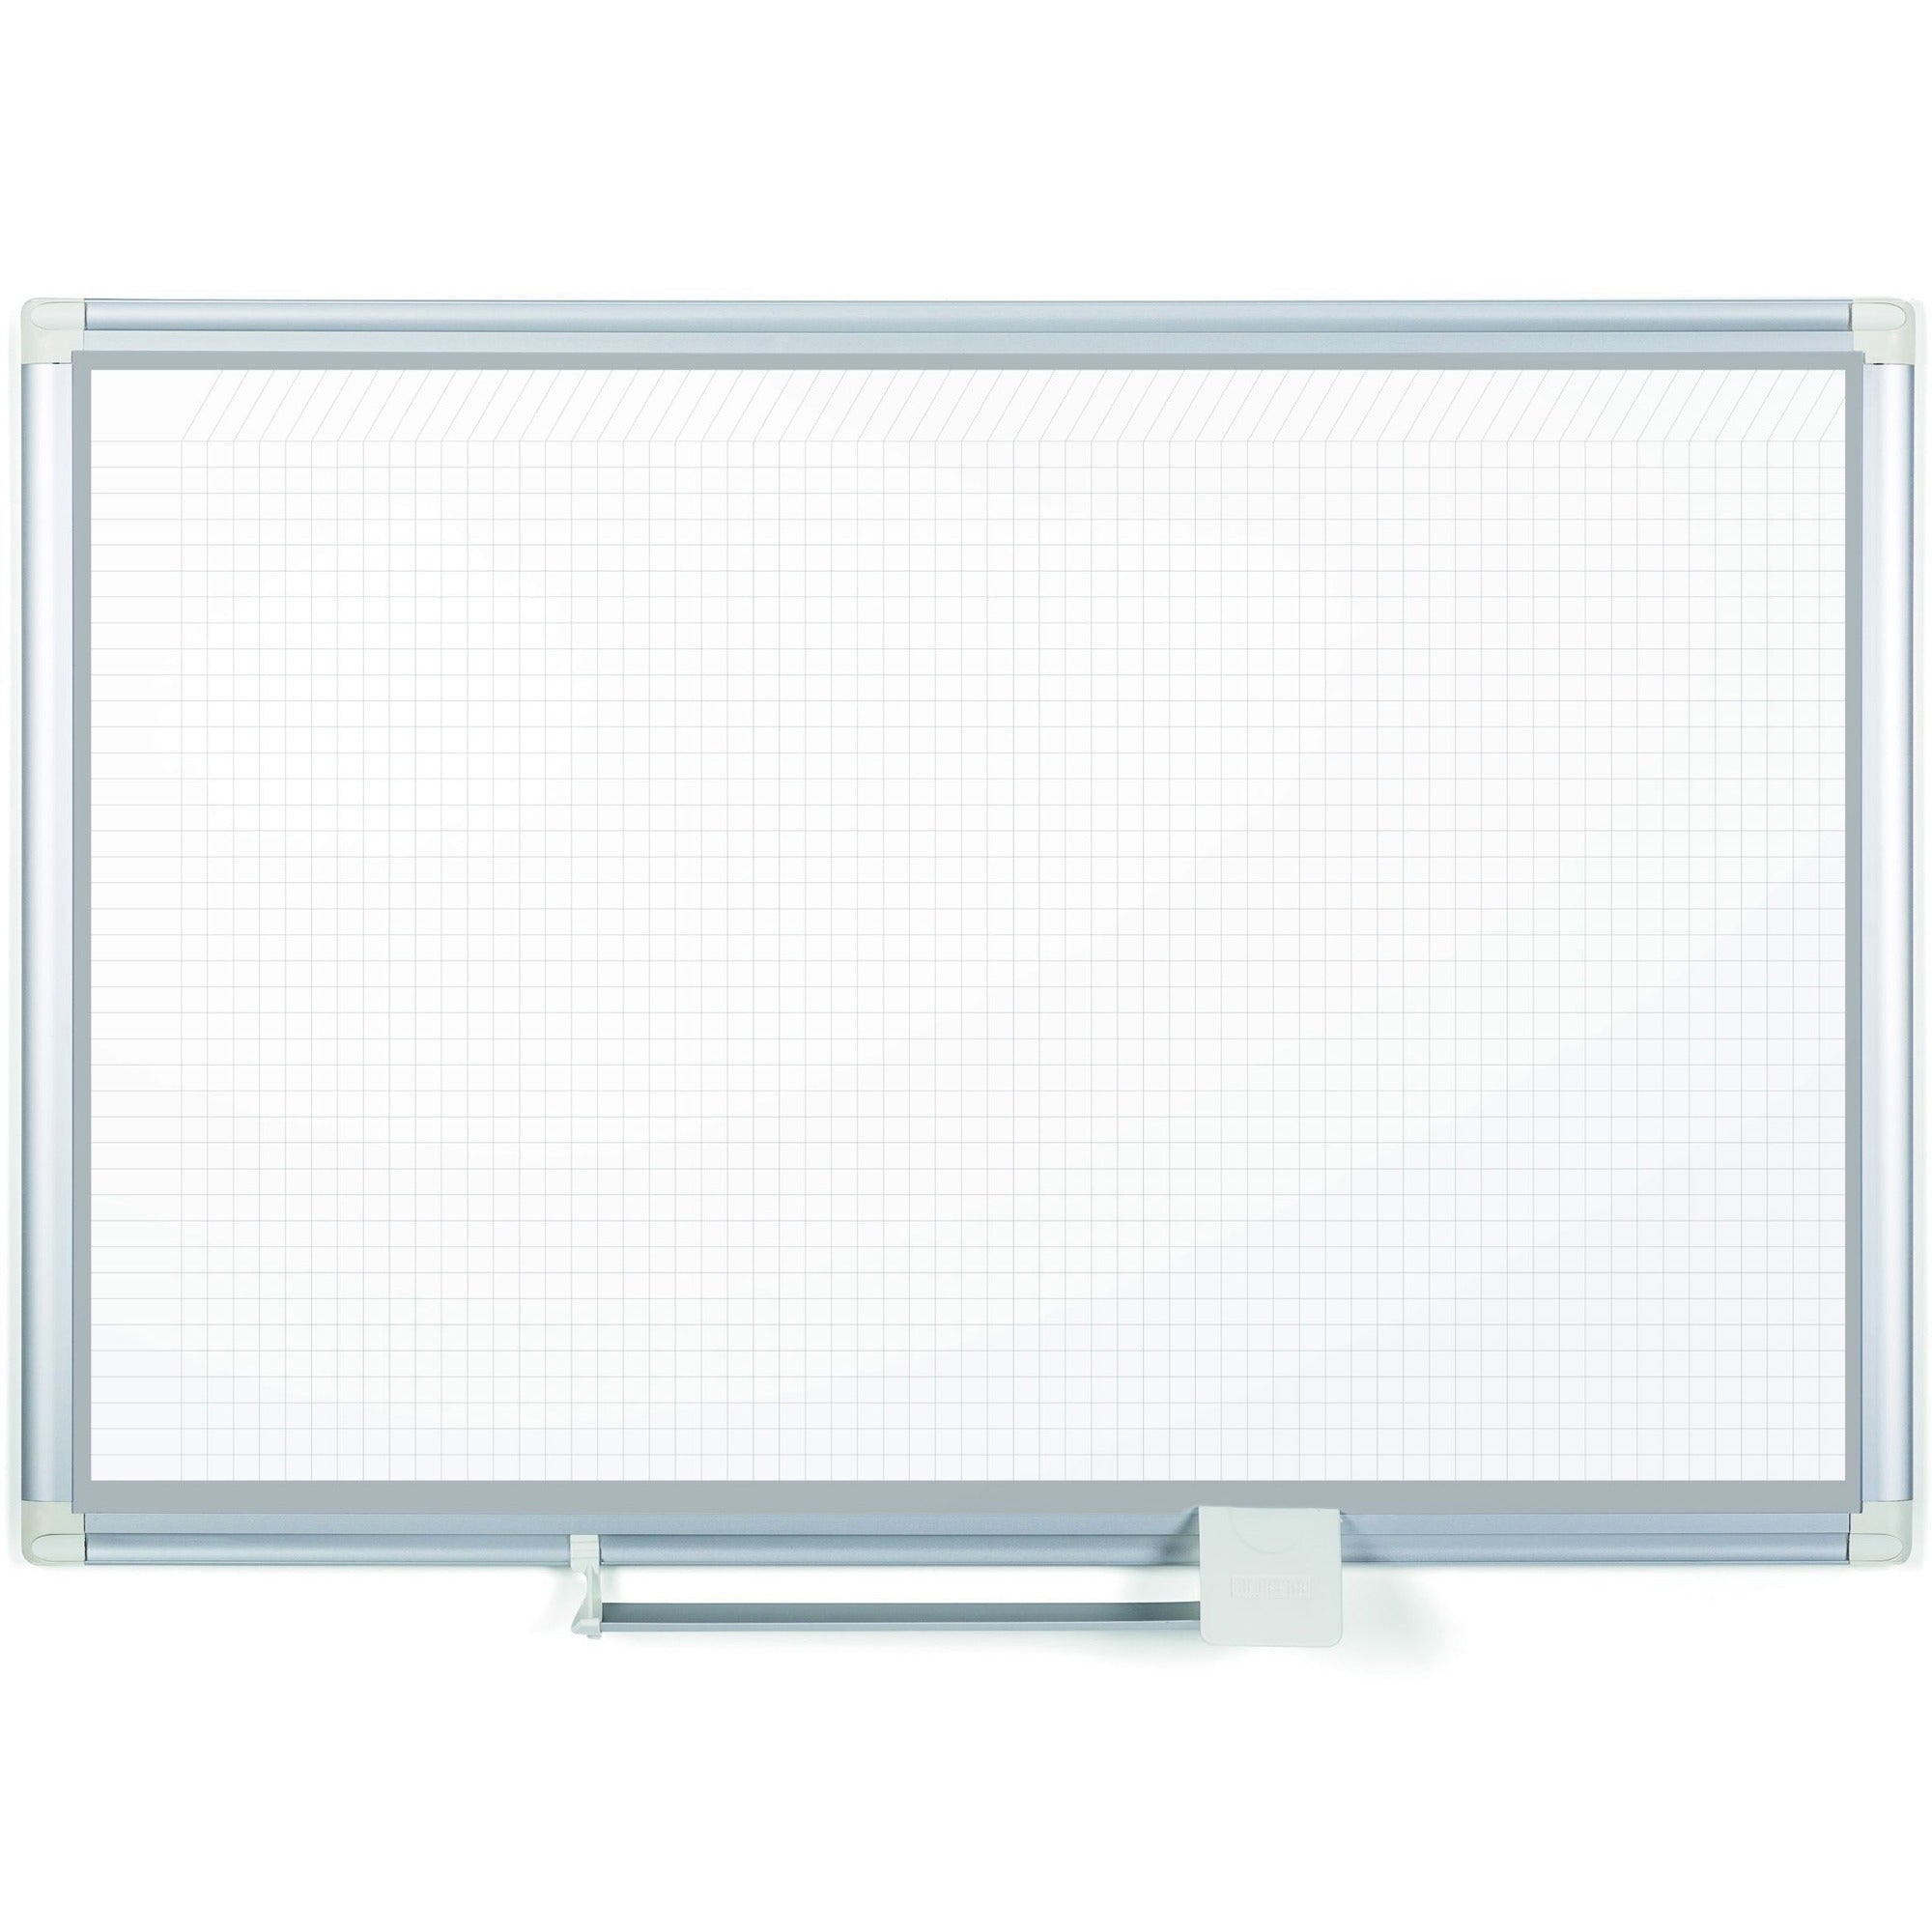 MasterVision Dry-erase Magnetic Planning Board - Pure White, Aluminum - Porcelain - 48" Height x 72" Width - Magnetic, Accessory Tray, Dry Erase Surface - 1 Each - 